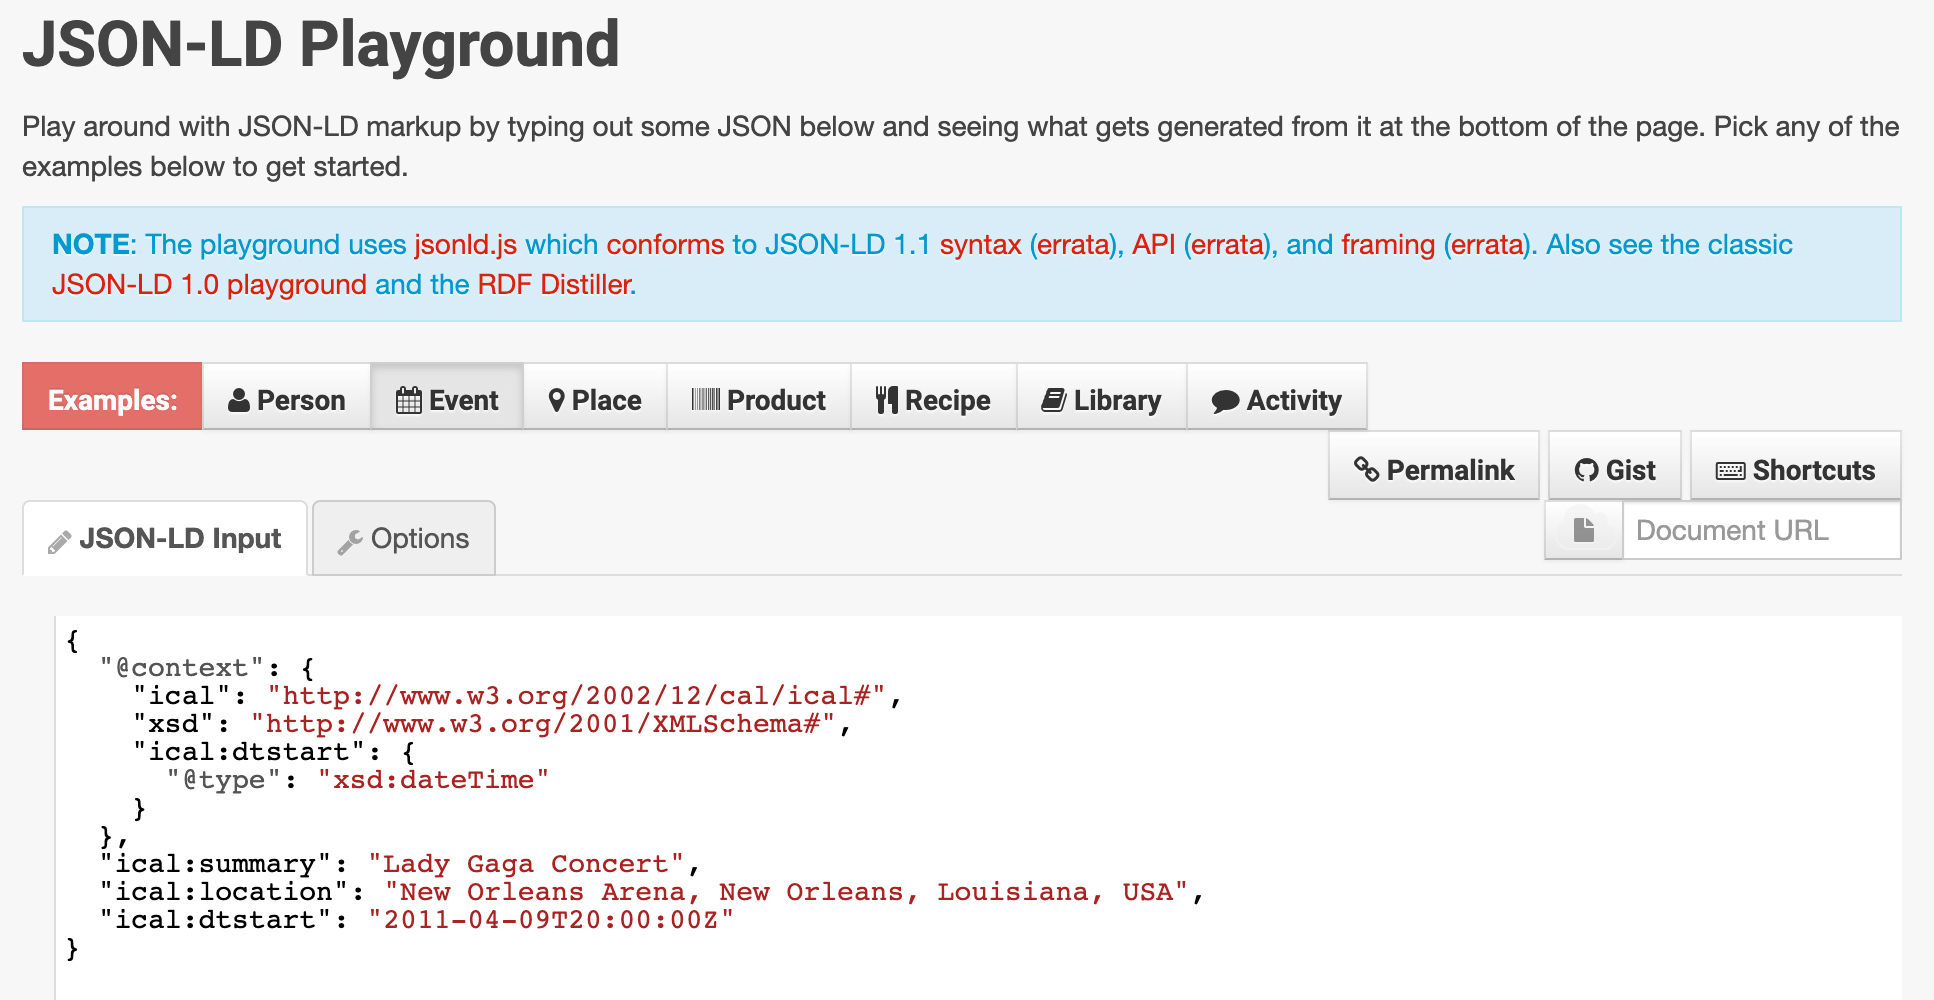 An example of JSON-LD code from JSON-LD Playground